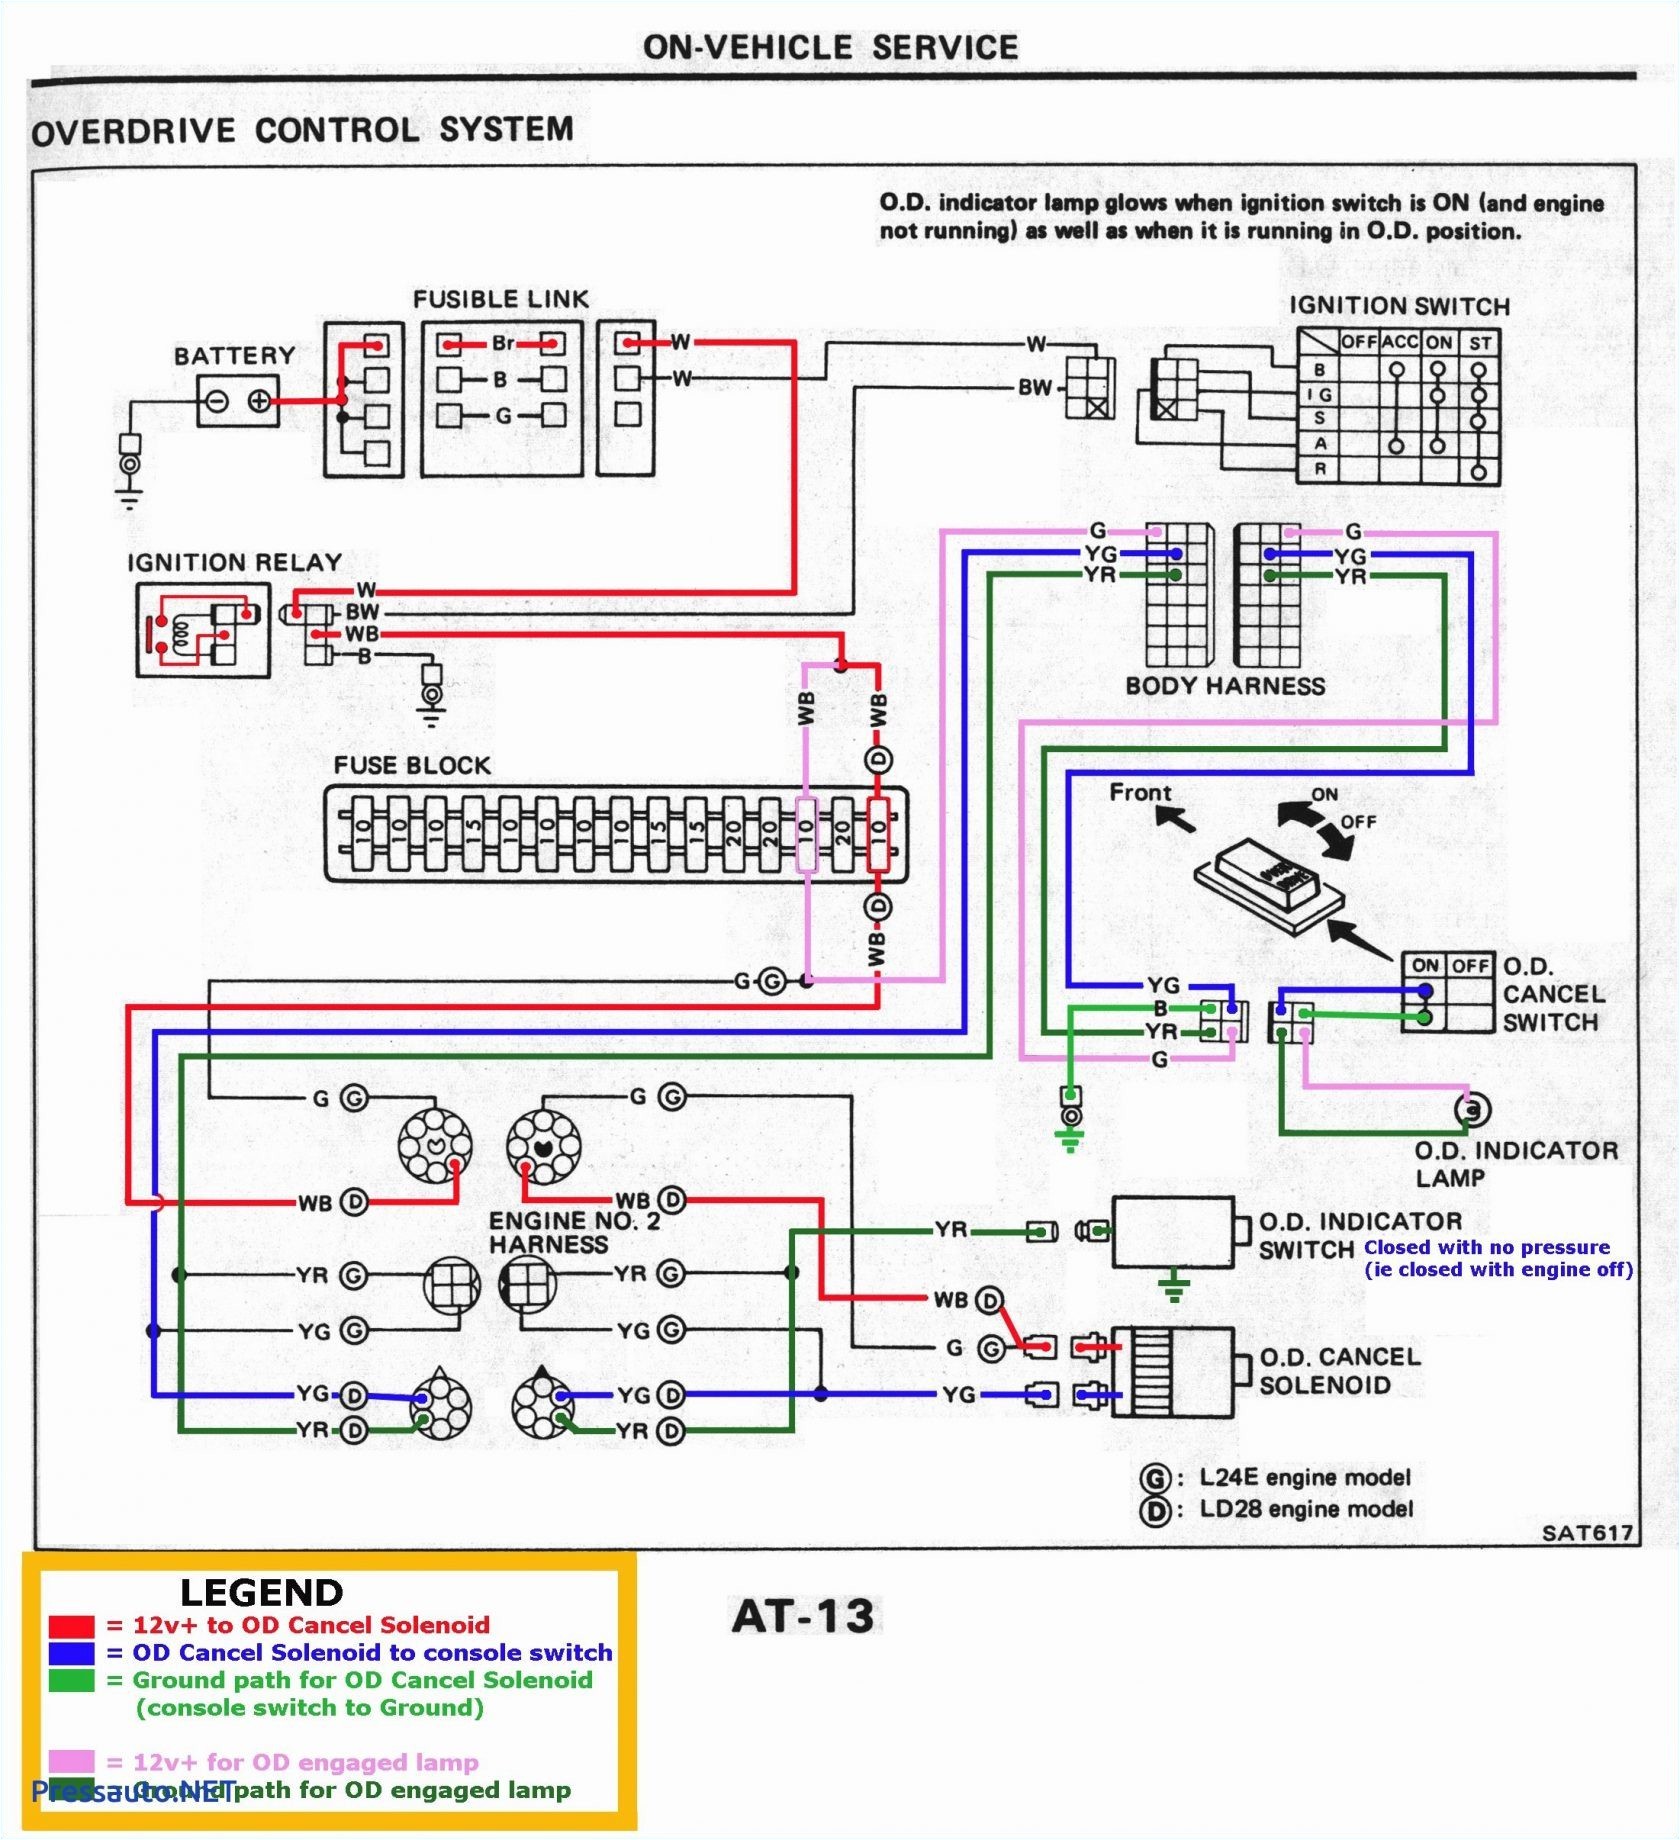 2000 S10 Taillight Wiring 1989 Chevy S10 Tail Light Wiring Diagram Wiring Diagram Of 2000 S10 Taillight Wiring